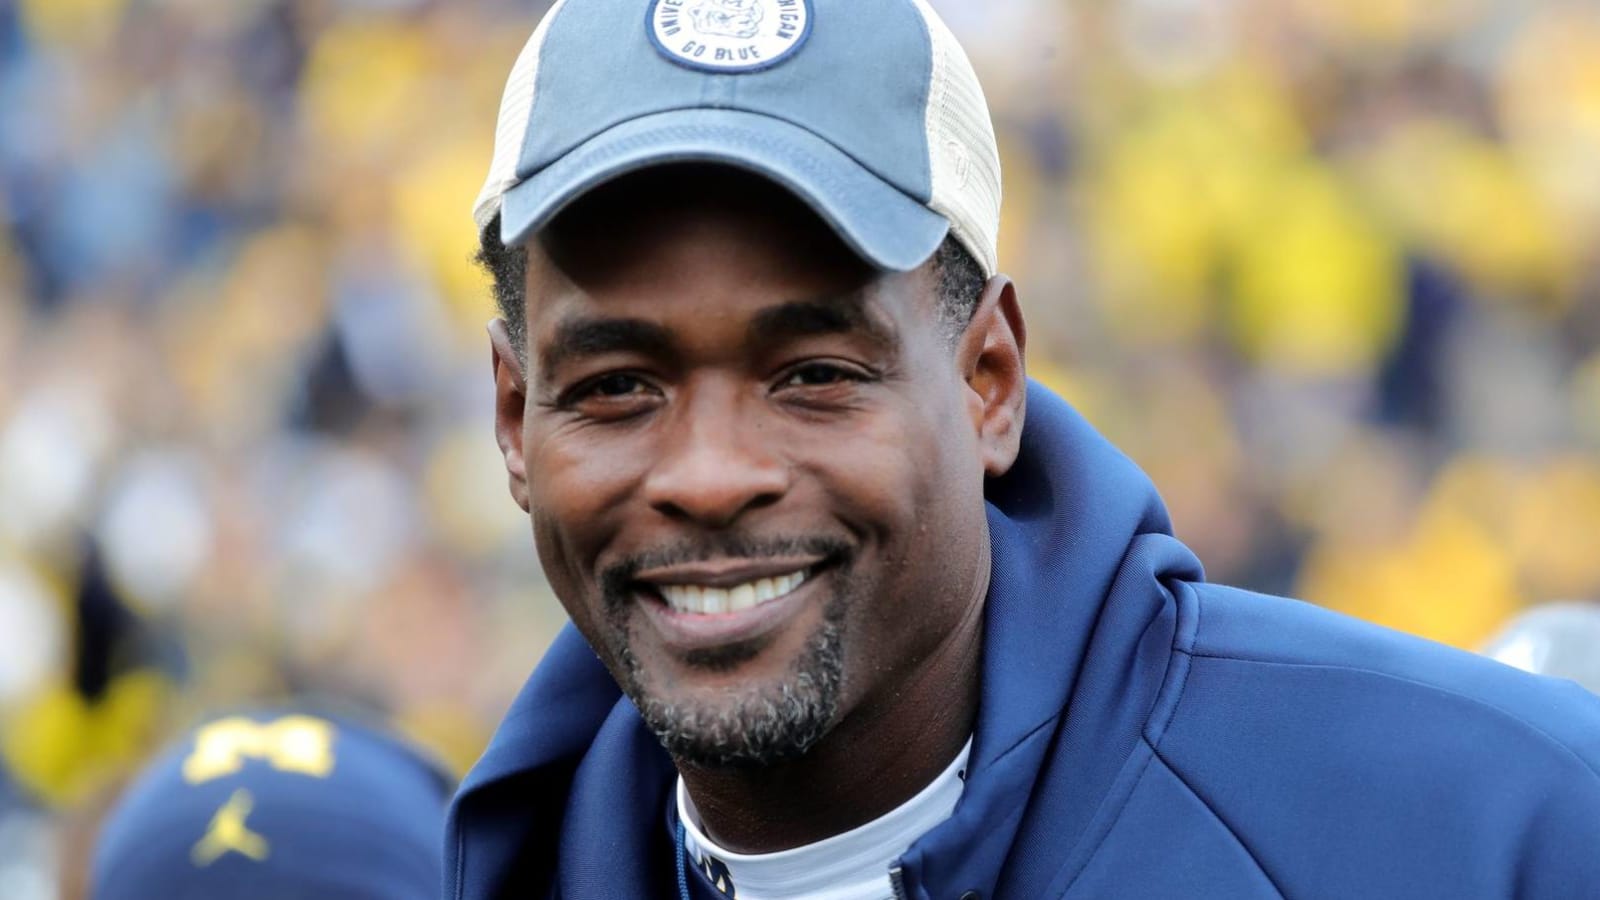 Chris Webber says Michigan AD issued him an apology